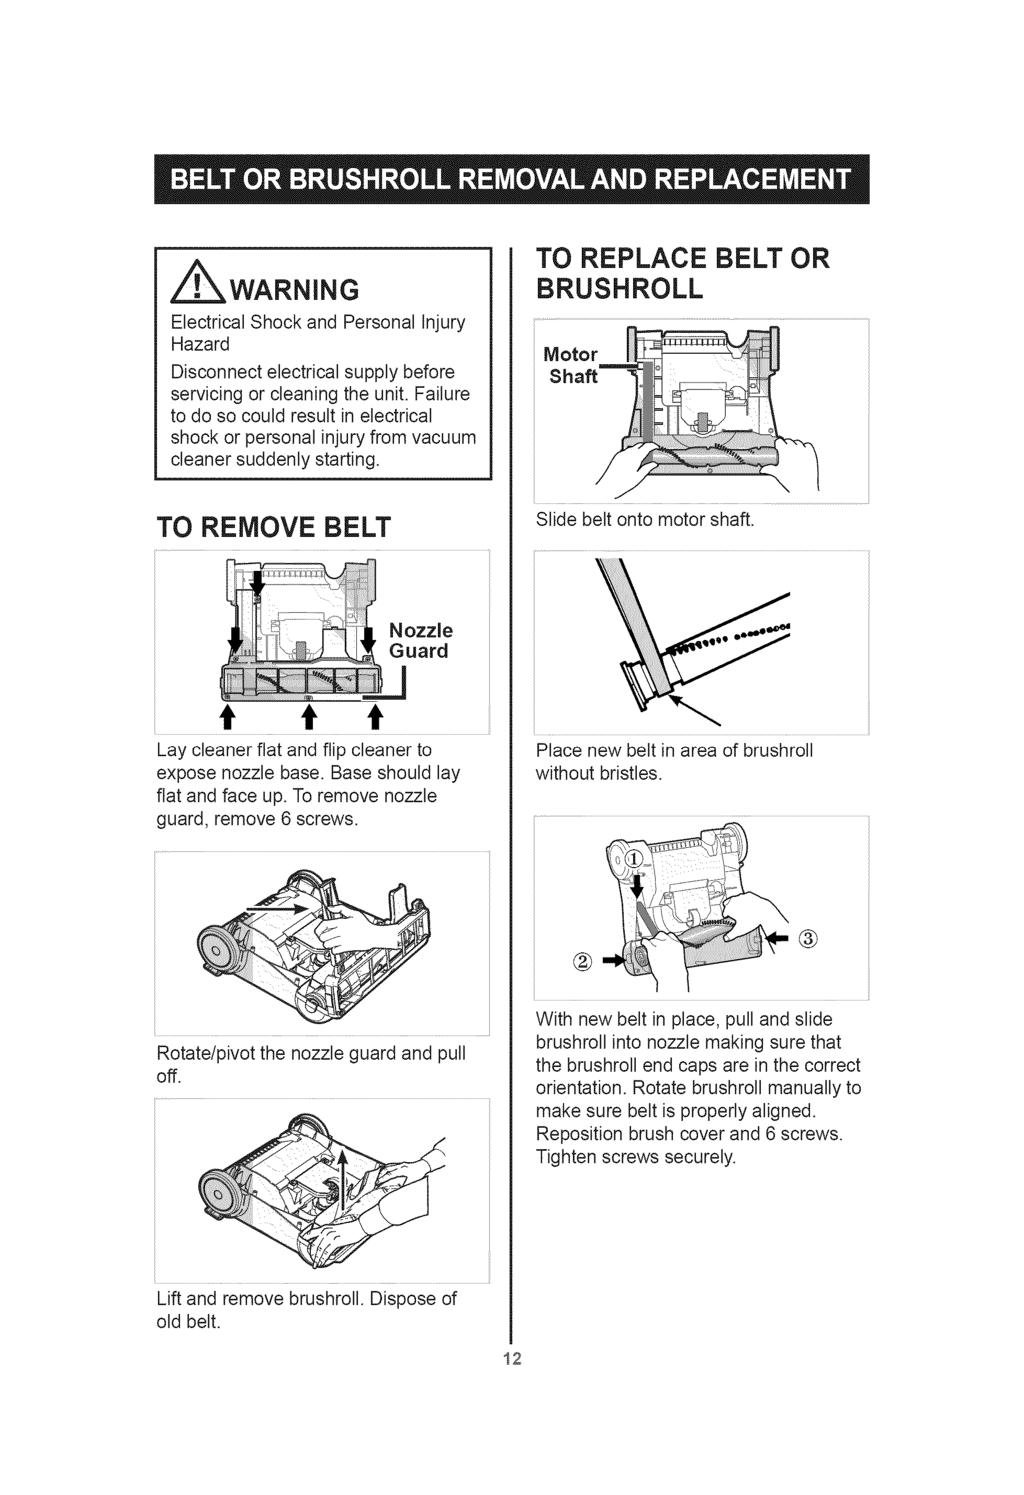 Z_WARNING Electrical Shock and Personal Injury Hazard Disconnect electrical supply before servicing or cleaning the unit.